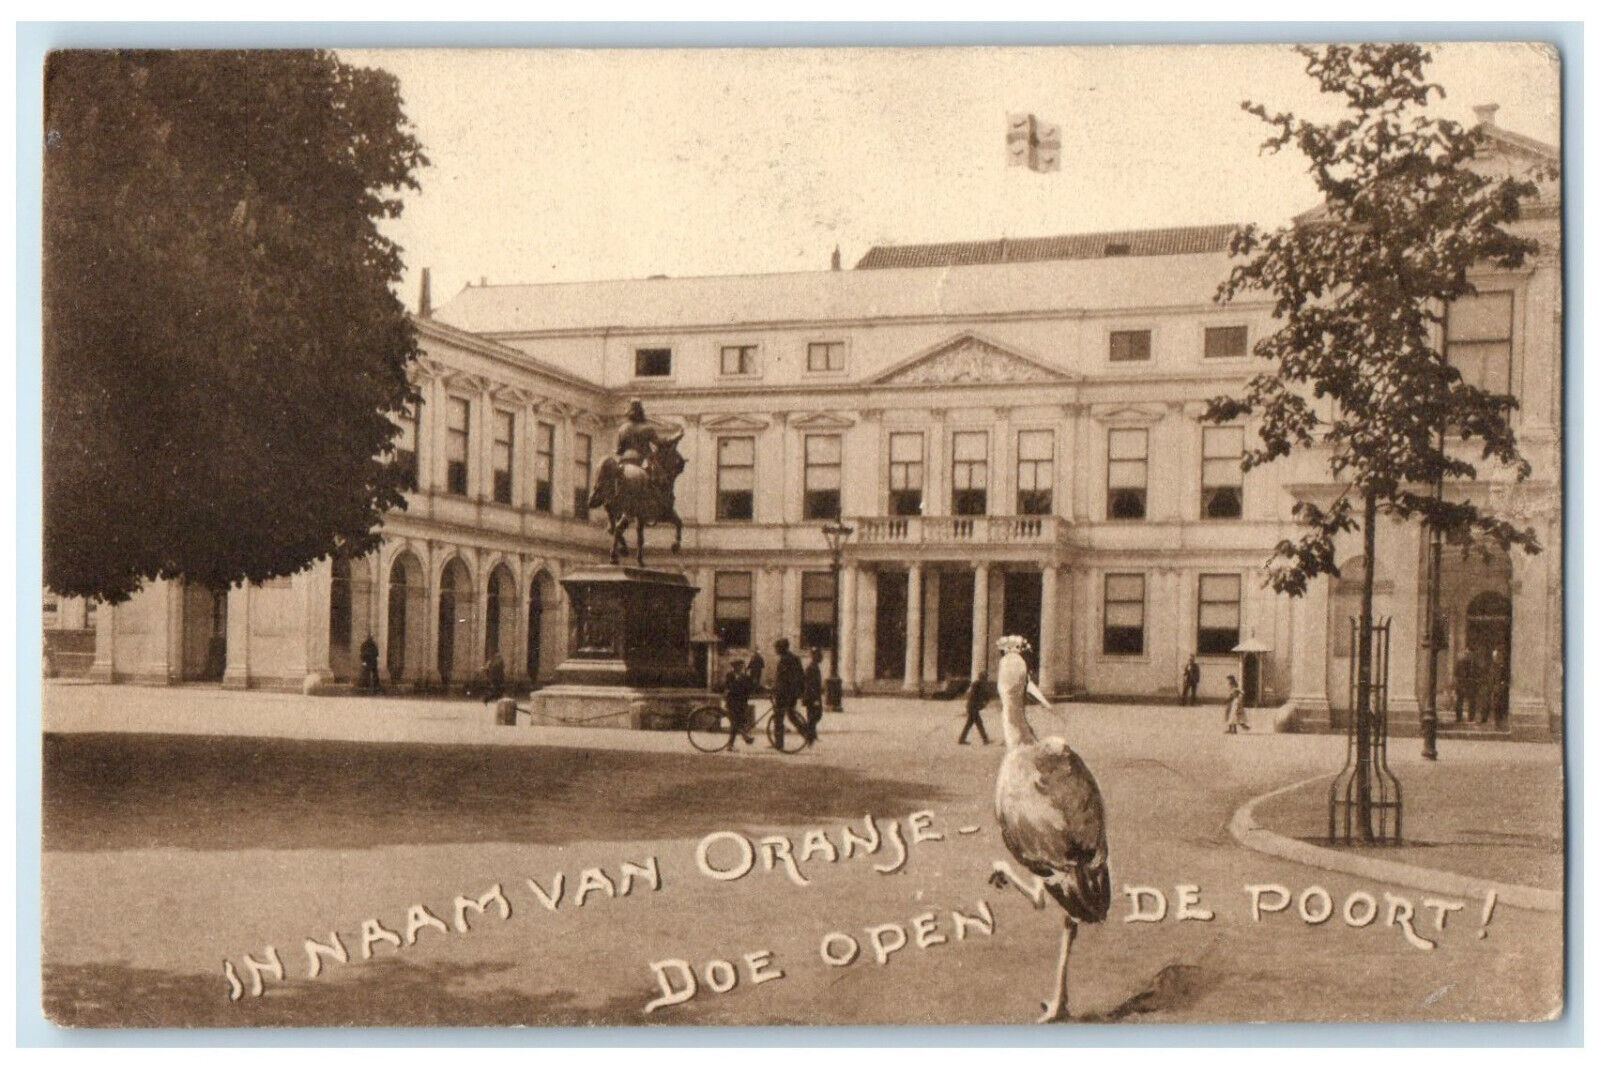 c1910 In the Name of Orange Open the Gate Netherlands Animal Monument Postcard